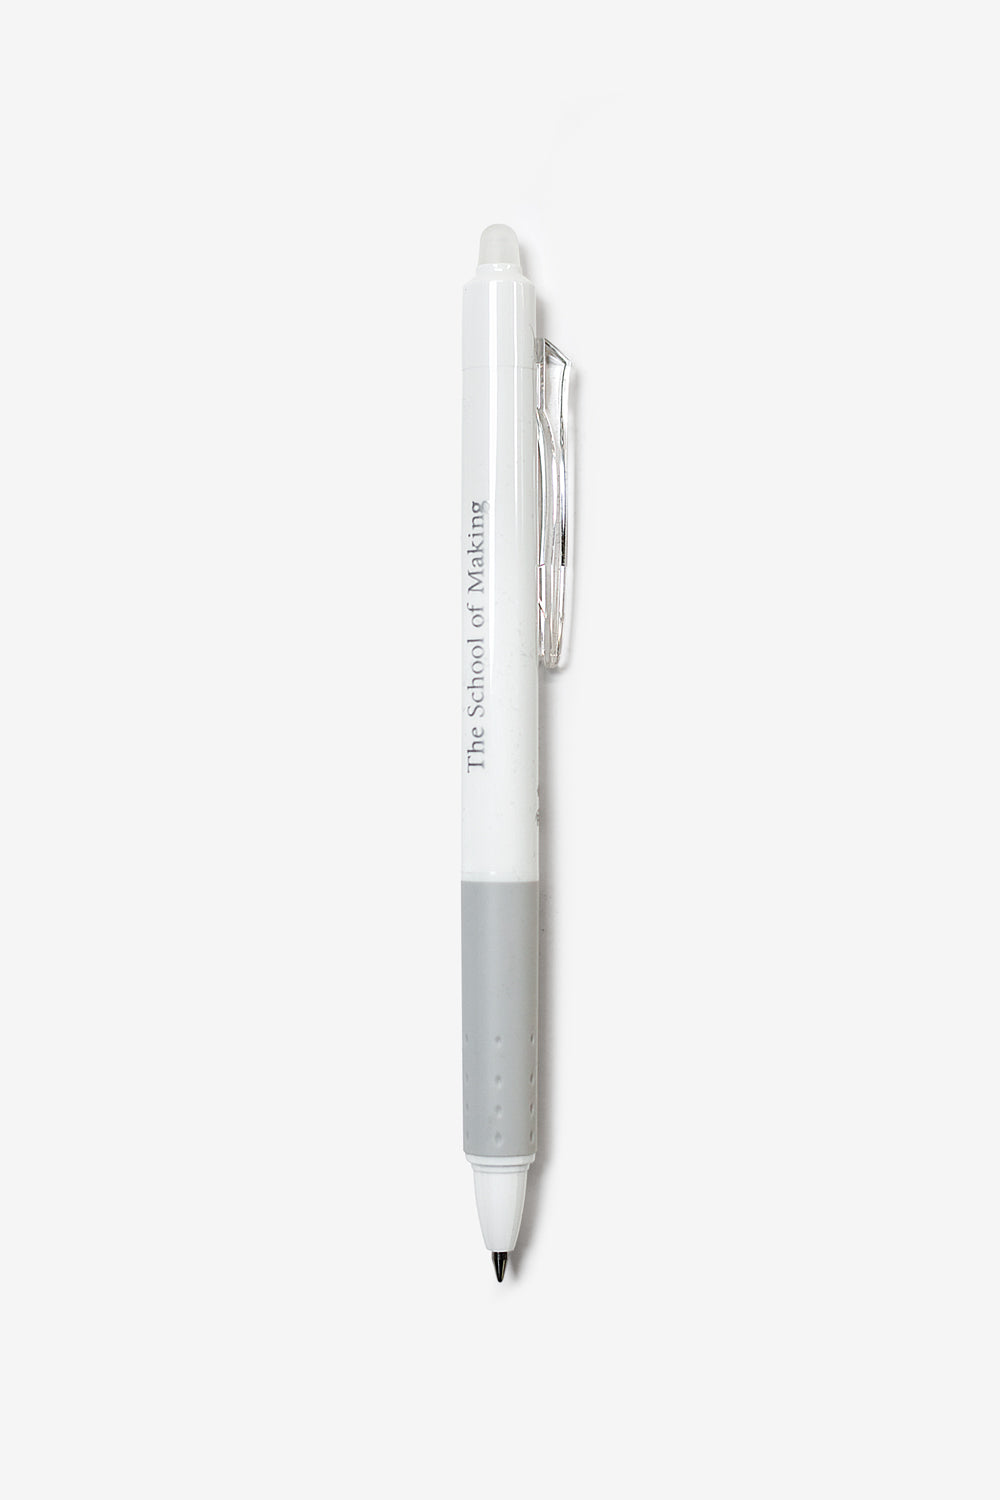 The School of Making Marking Tools Erasable Friction Pen for Pattern and Sewing Construction